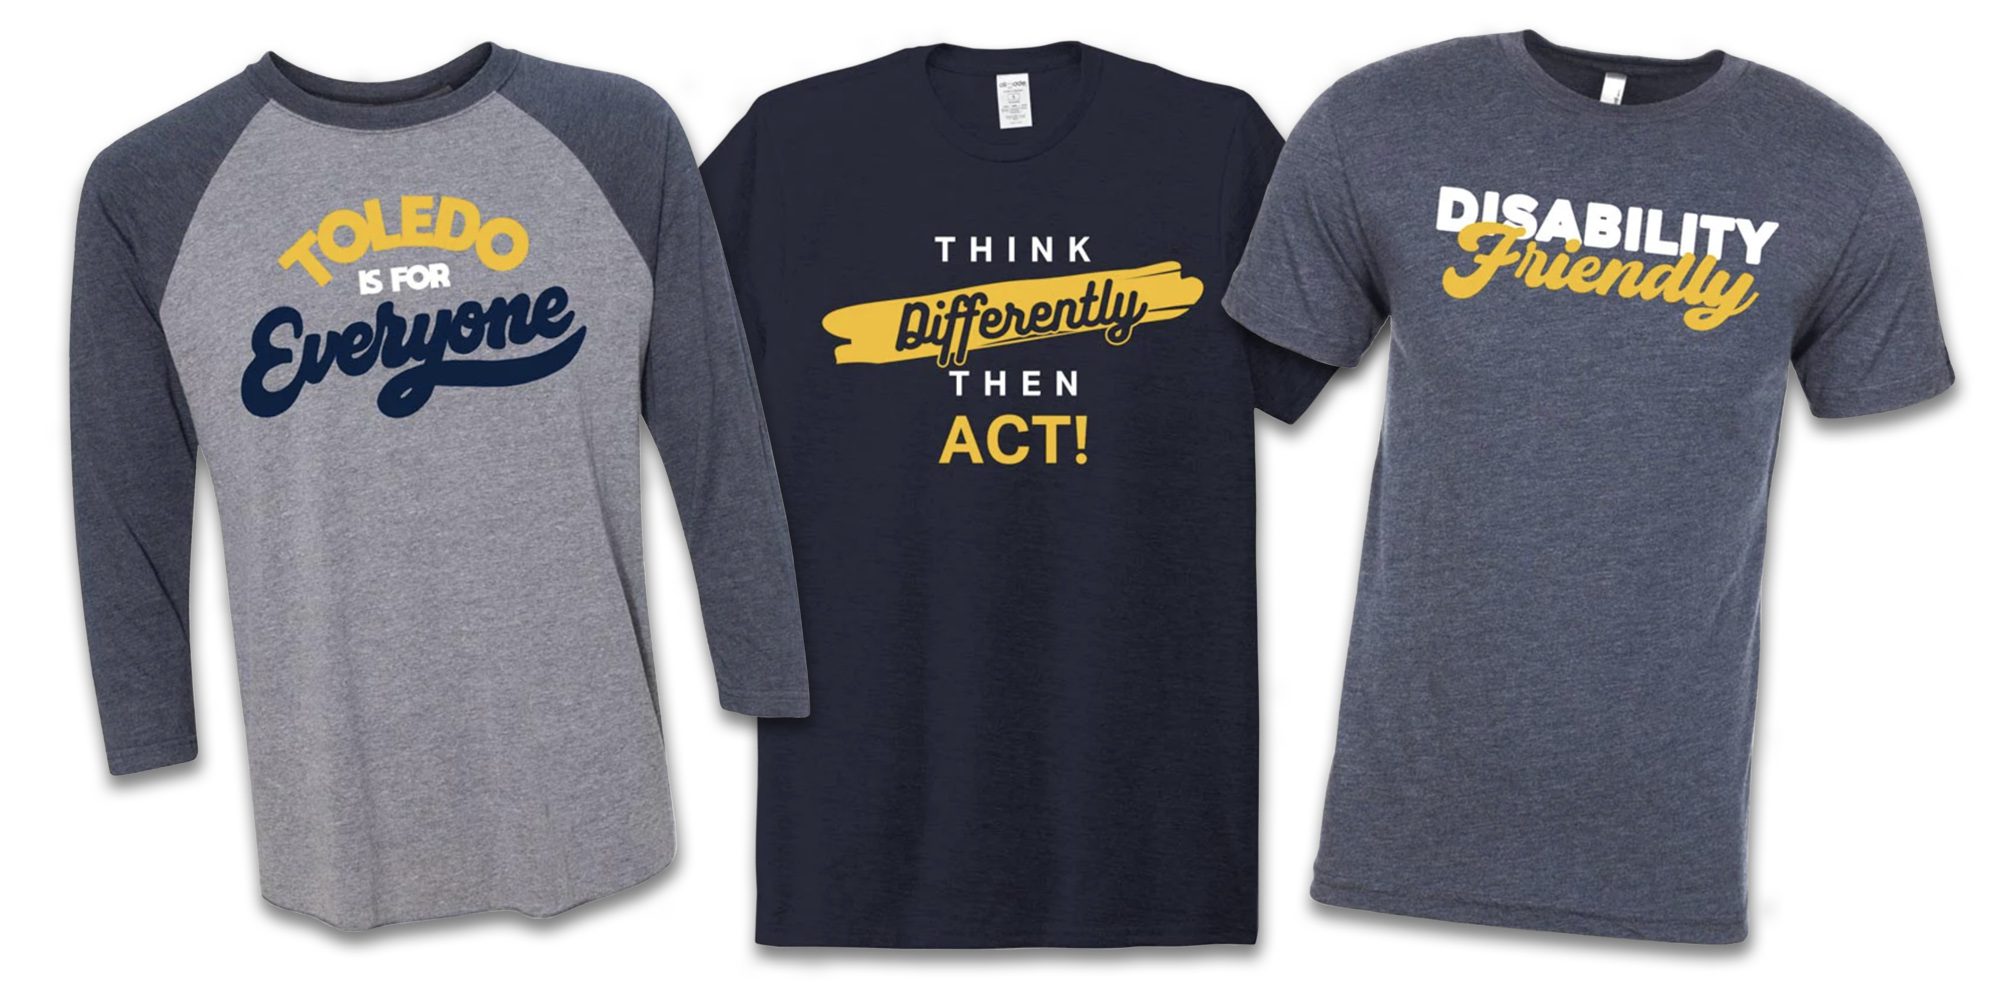 Think Differently T-shirts